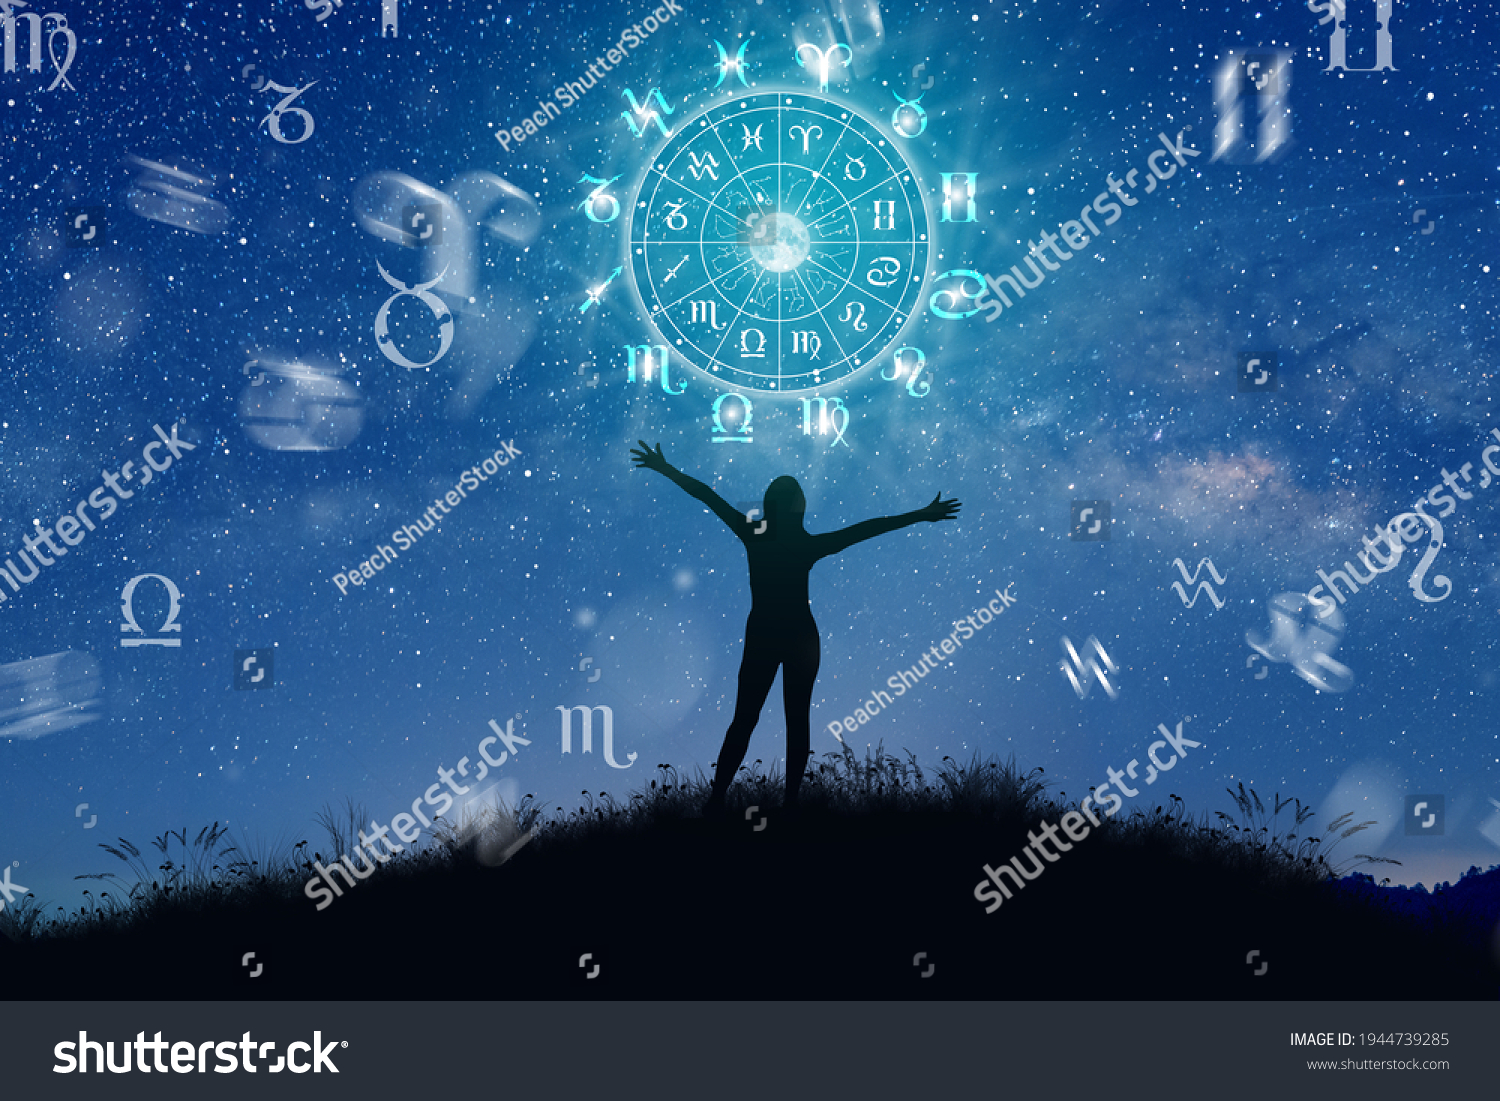 Astrological zodiac signs inside of horoscope circle. Illustration of Woman silhouette consulting the stars and moon over the zodiac wheel and milky way background. The power of the universe concept. #1944739285